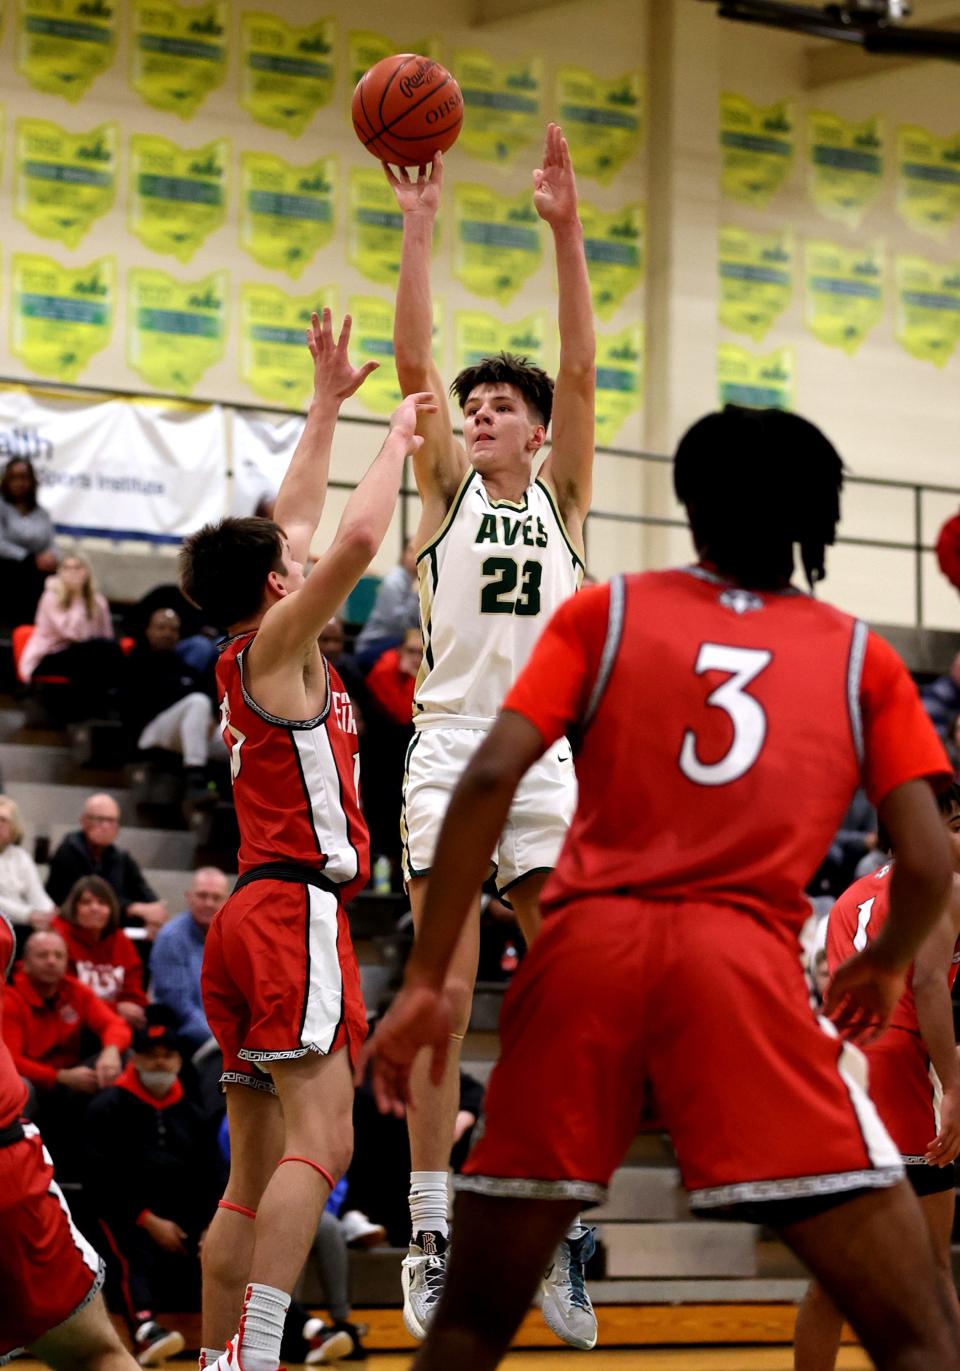 Sycamore forward Ben Southerland knocks this shot down for a field goal in the game between Lakota West and Sycamore at Sycamore High School Dec. 7, 2021. Sycamore beat their Greater Miami Conference rival 72-54 behind Southerland's 21 points.